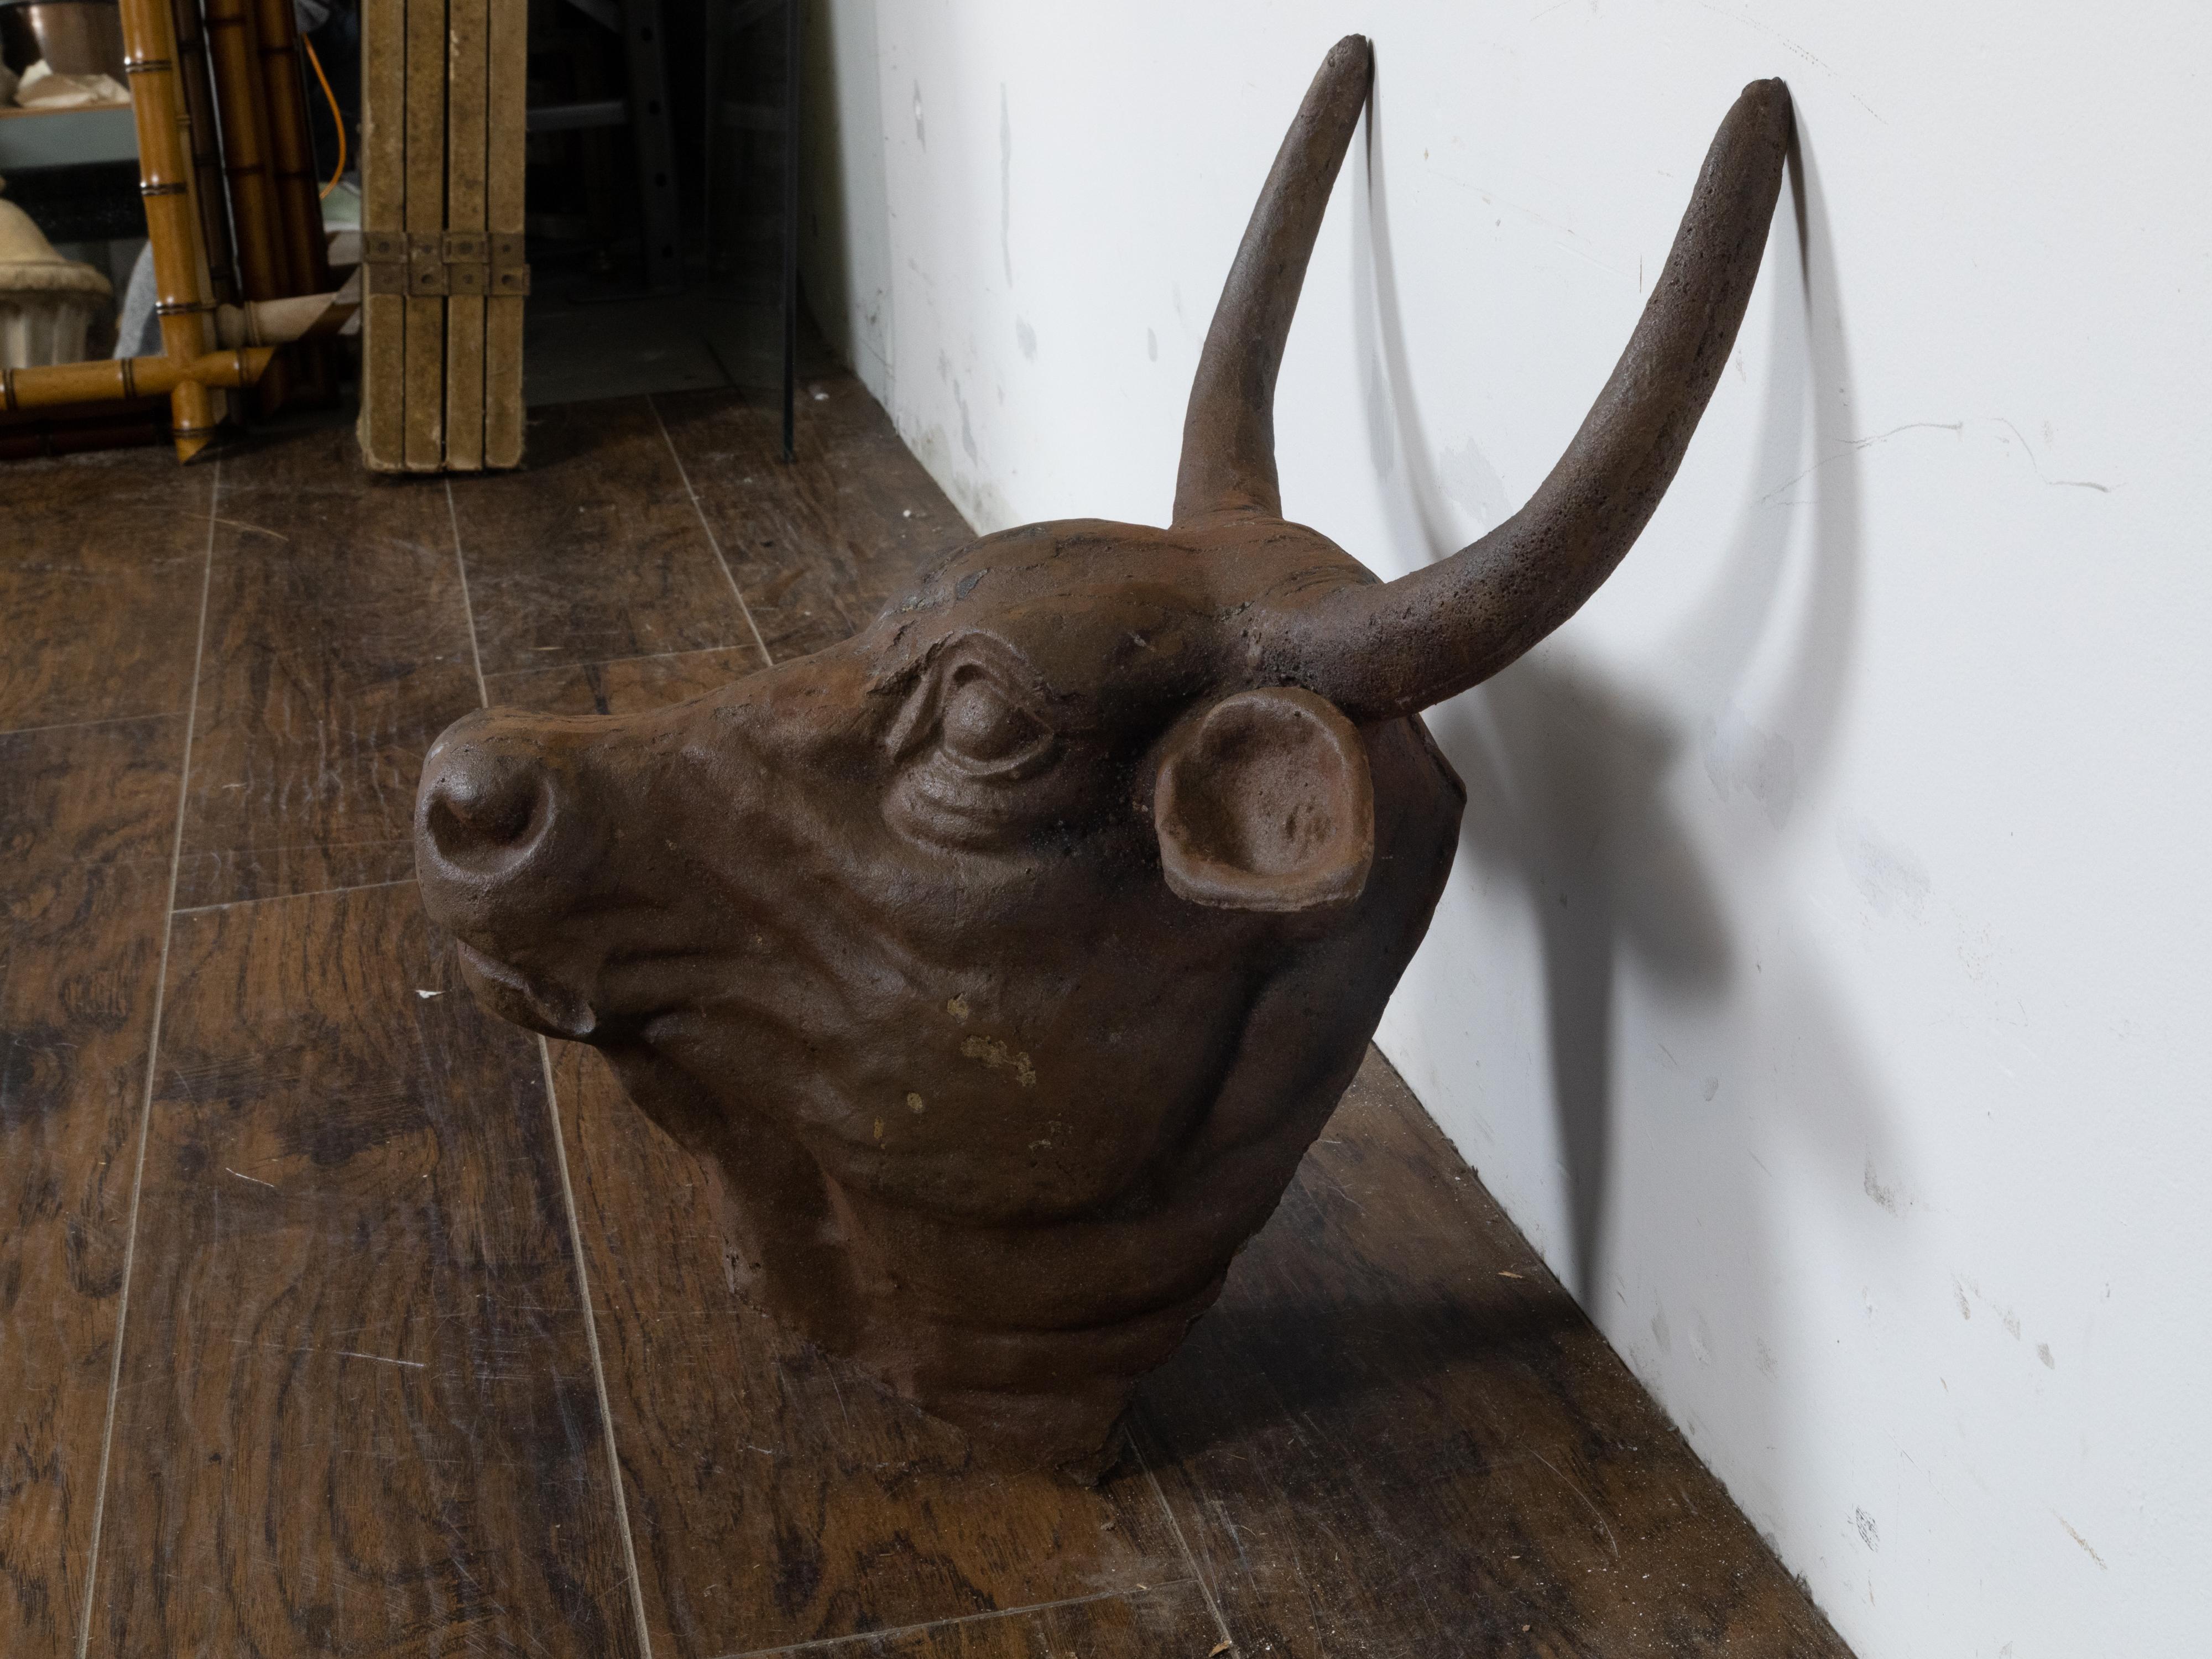 English 1930s-1940s Cast Iron Bull Wall Hanging Sculpture with Rusty Patina For Sale 4